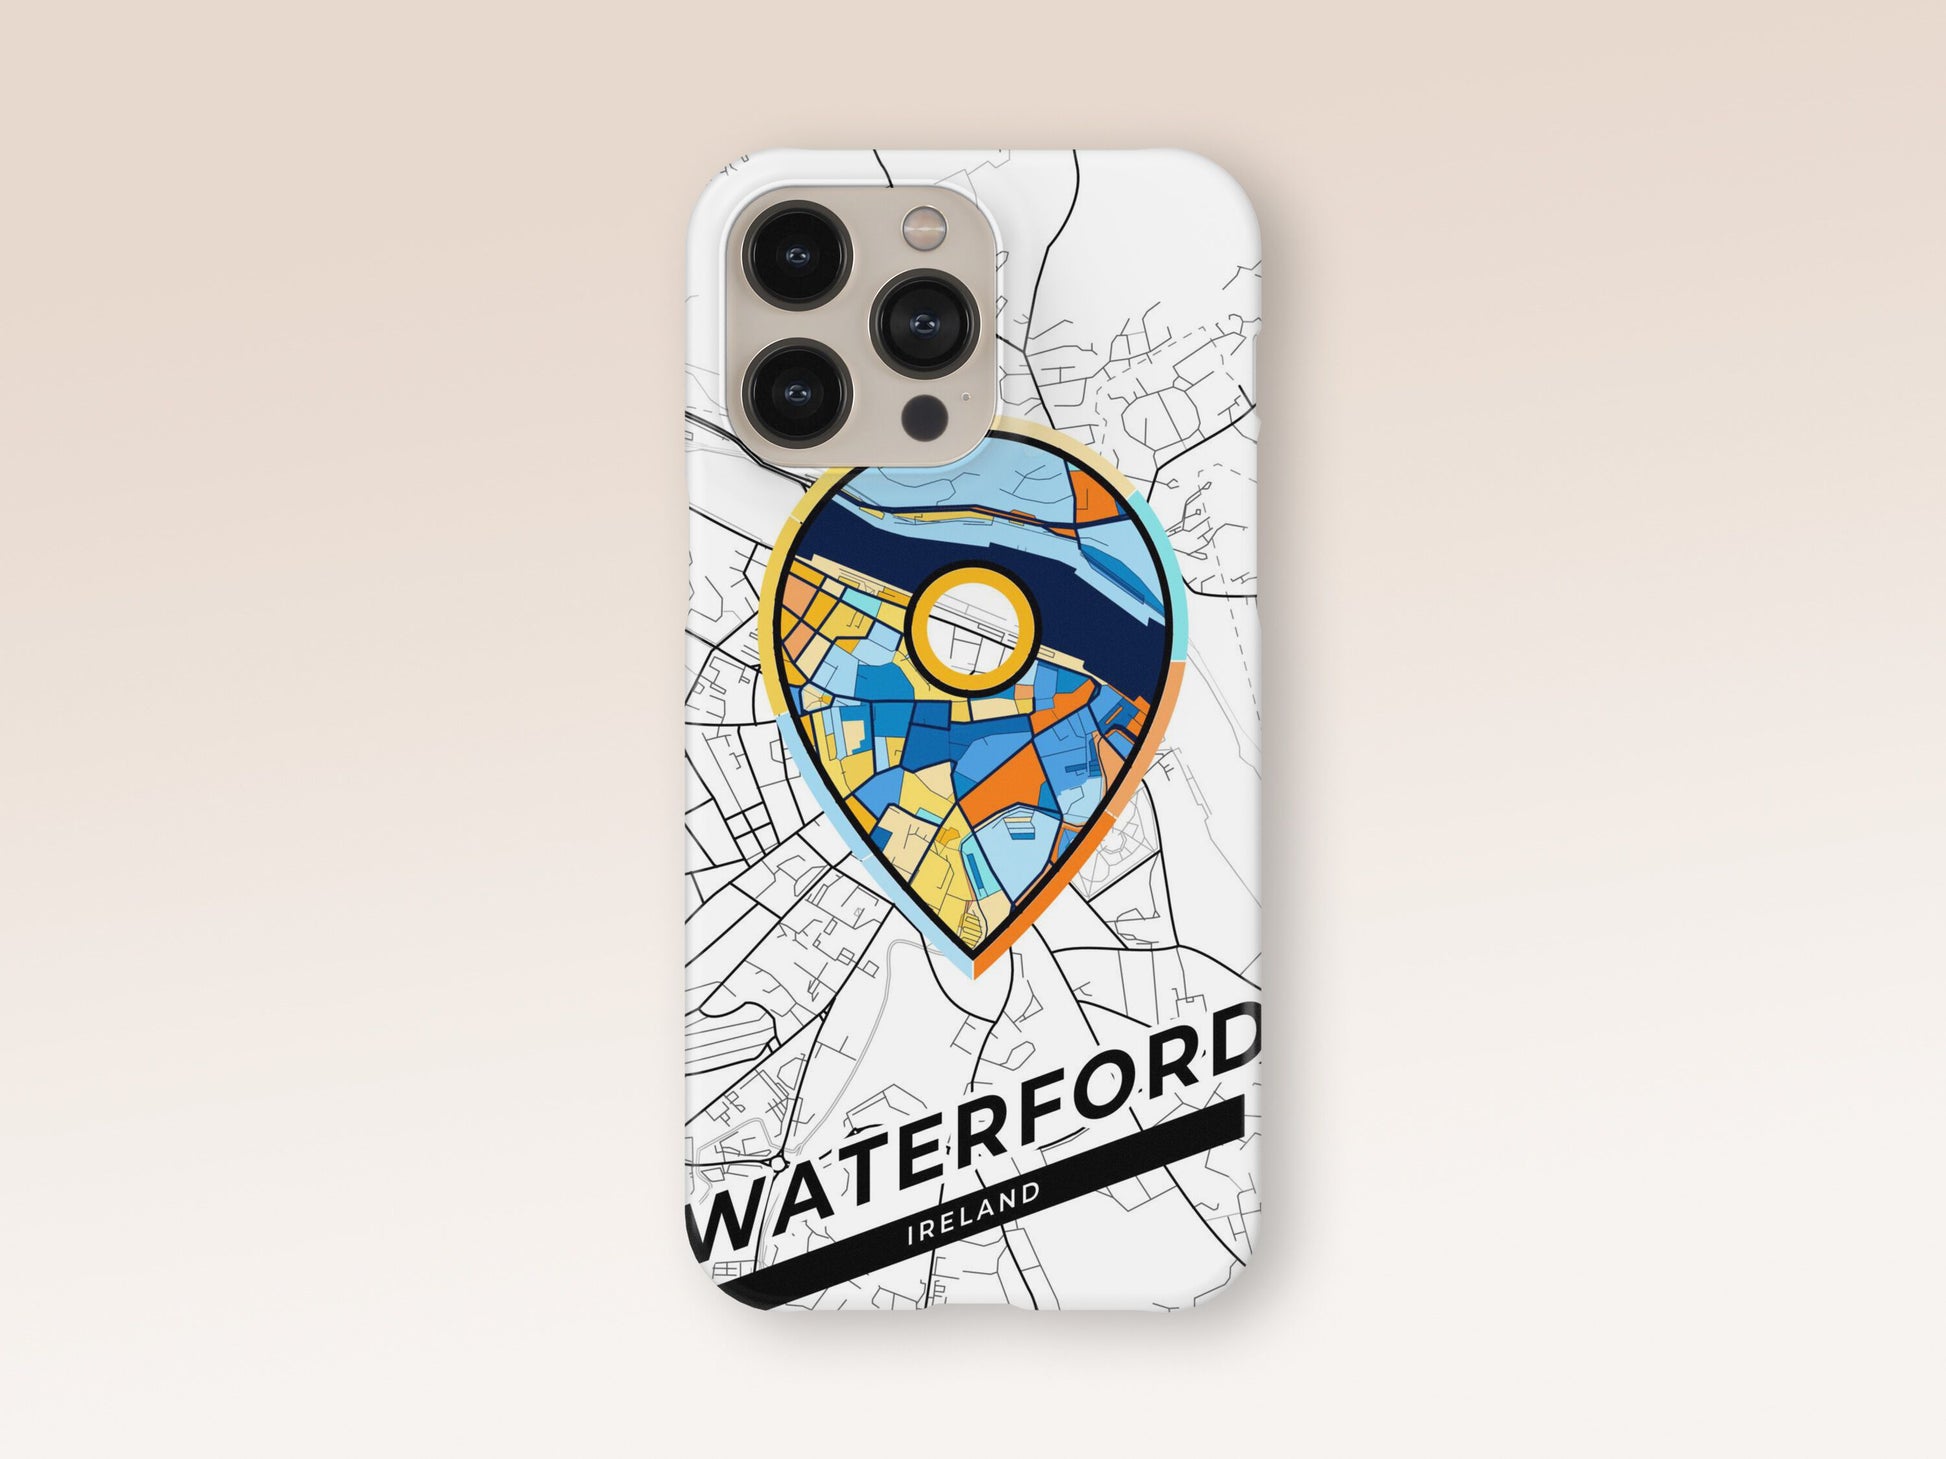 Waterford Ireland slim phone case with colorful icon 1